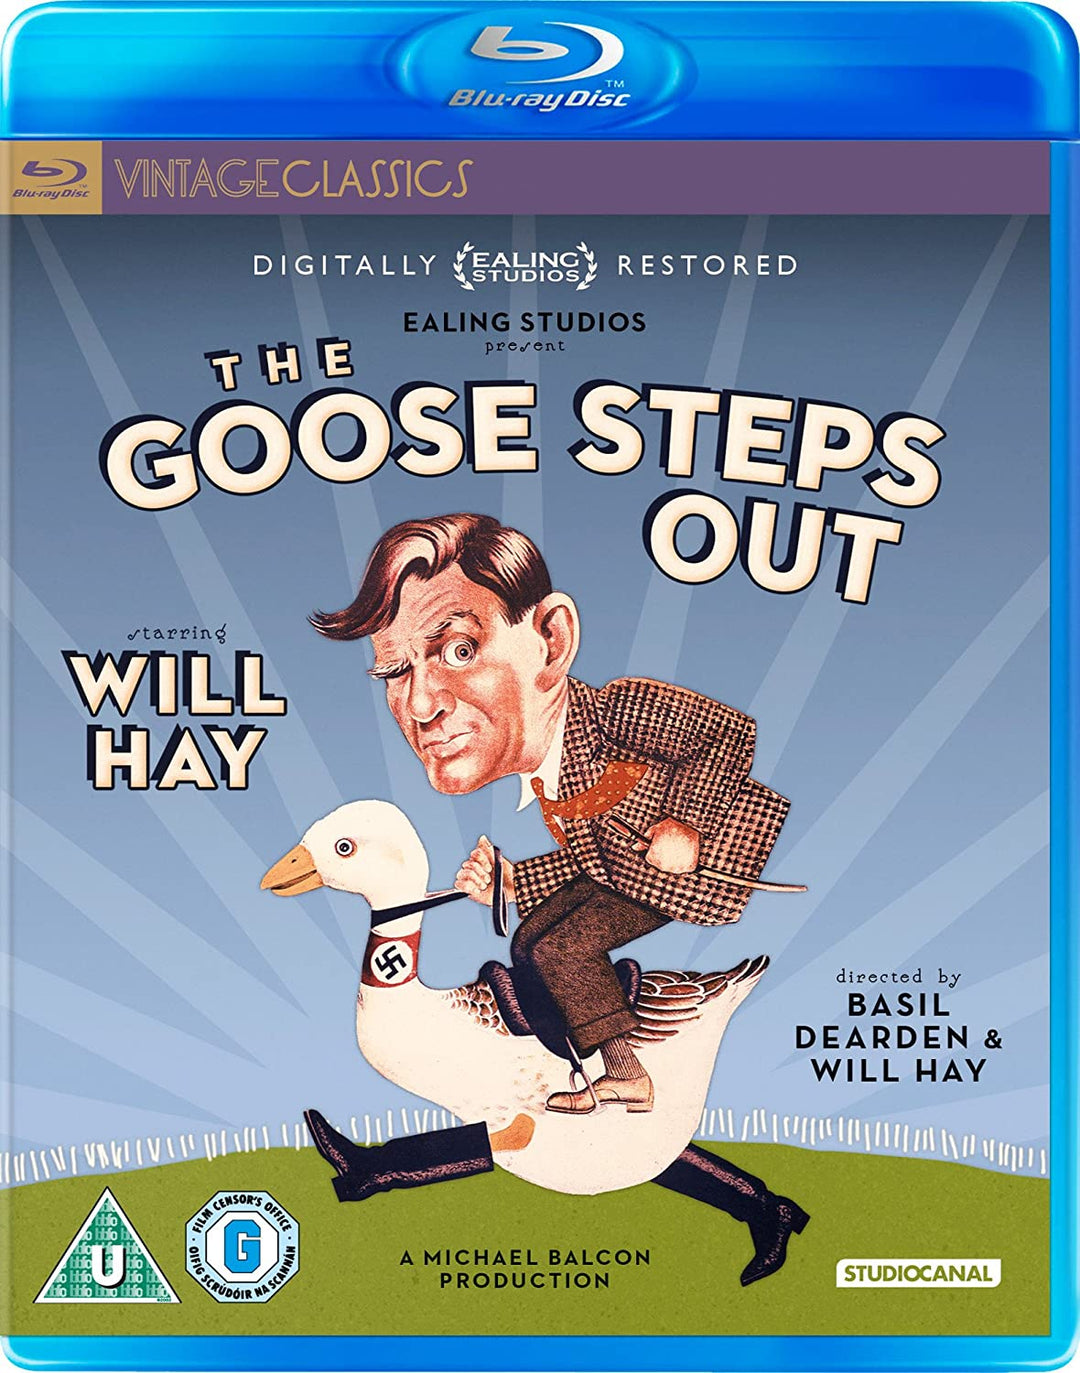 The Goose Steps Out - 75th Anniversary tally Restored) [1942] - Comedy/Black and white [Blu-ray]